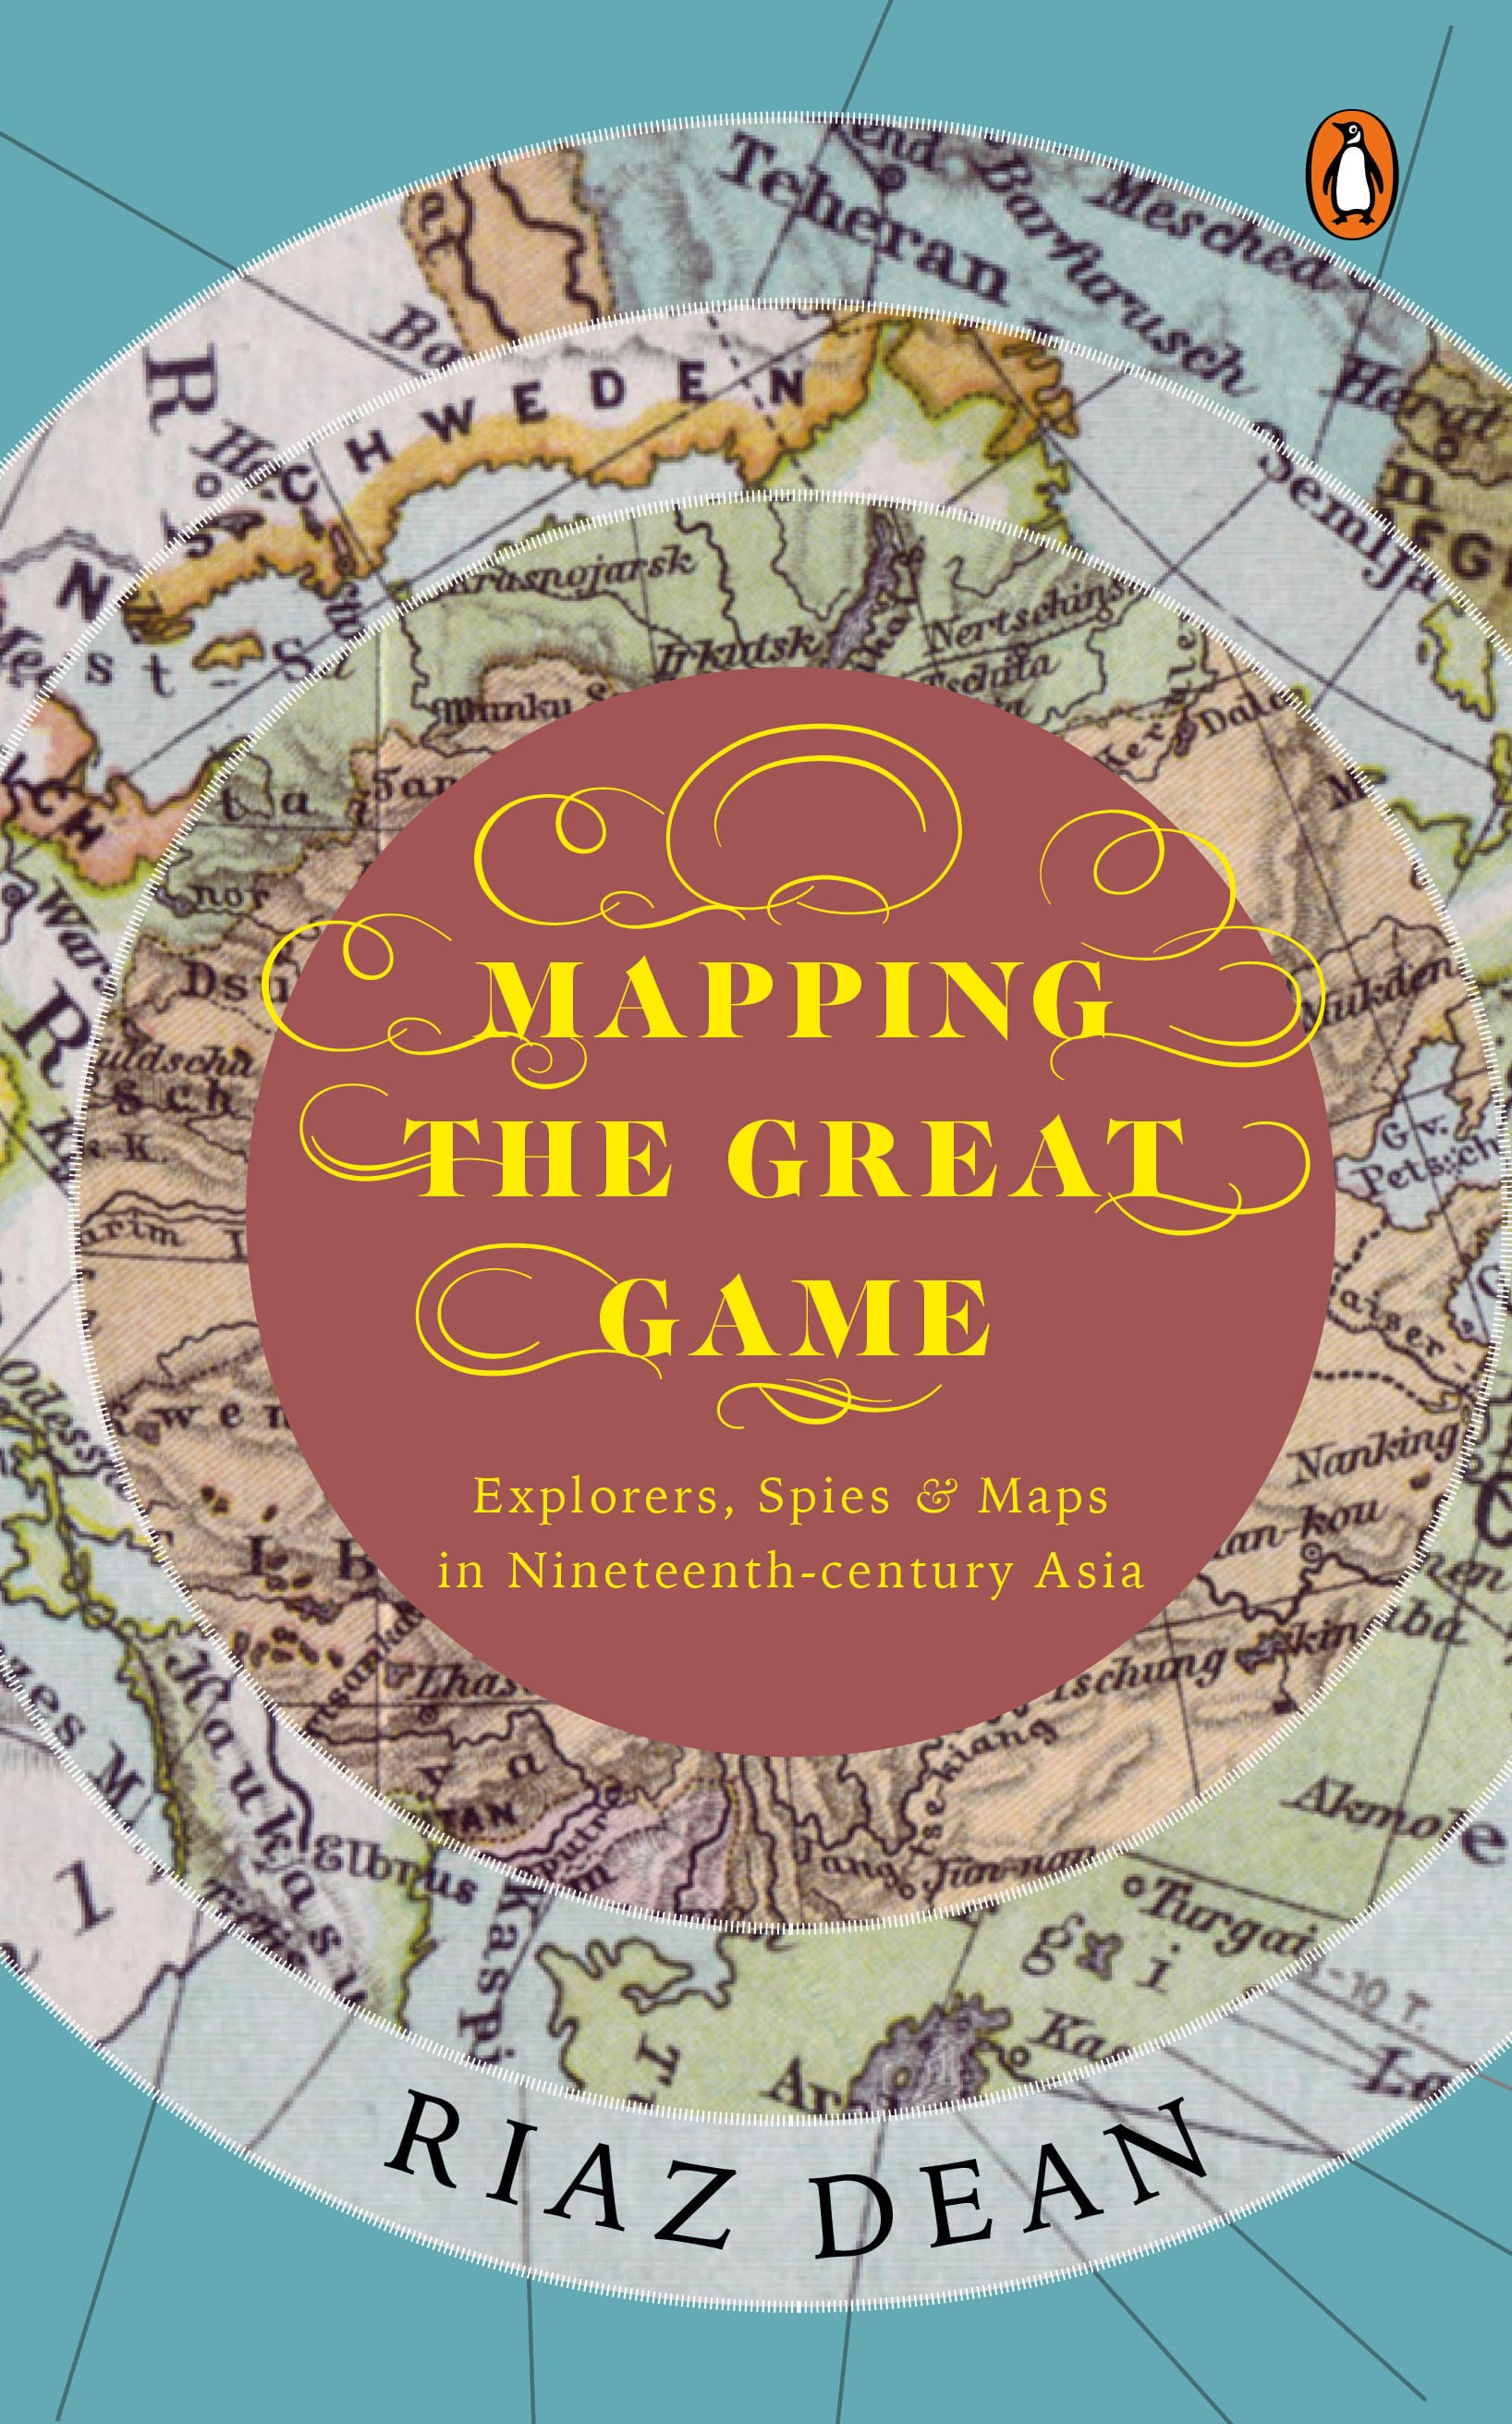 Riaz Dean on "Mapping the Great Game": 'This book is about the extraordinary pioneers who explored much of Asia during the 19th century to fill in large portions of its map'